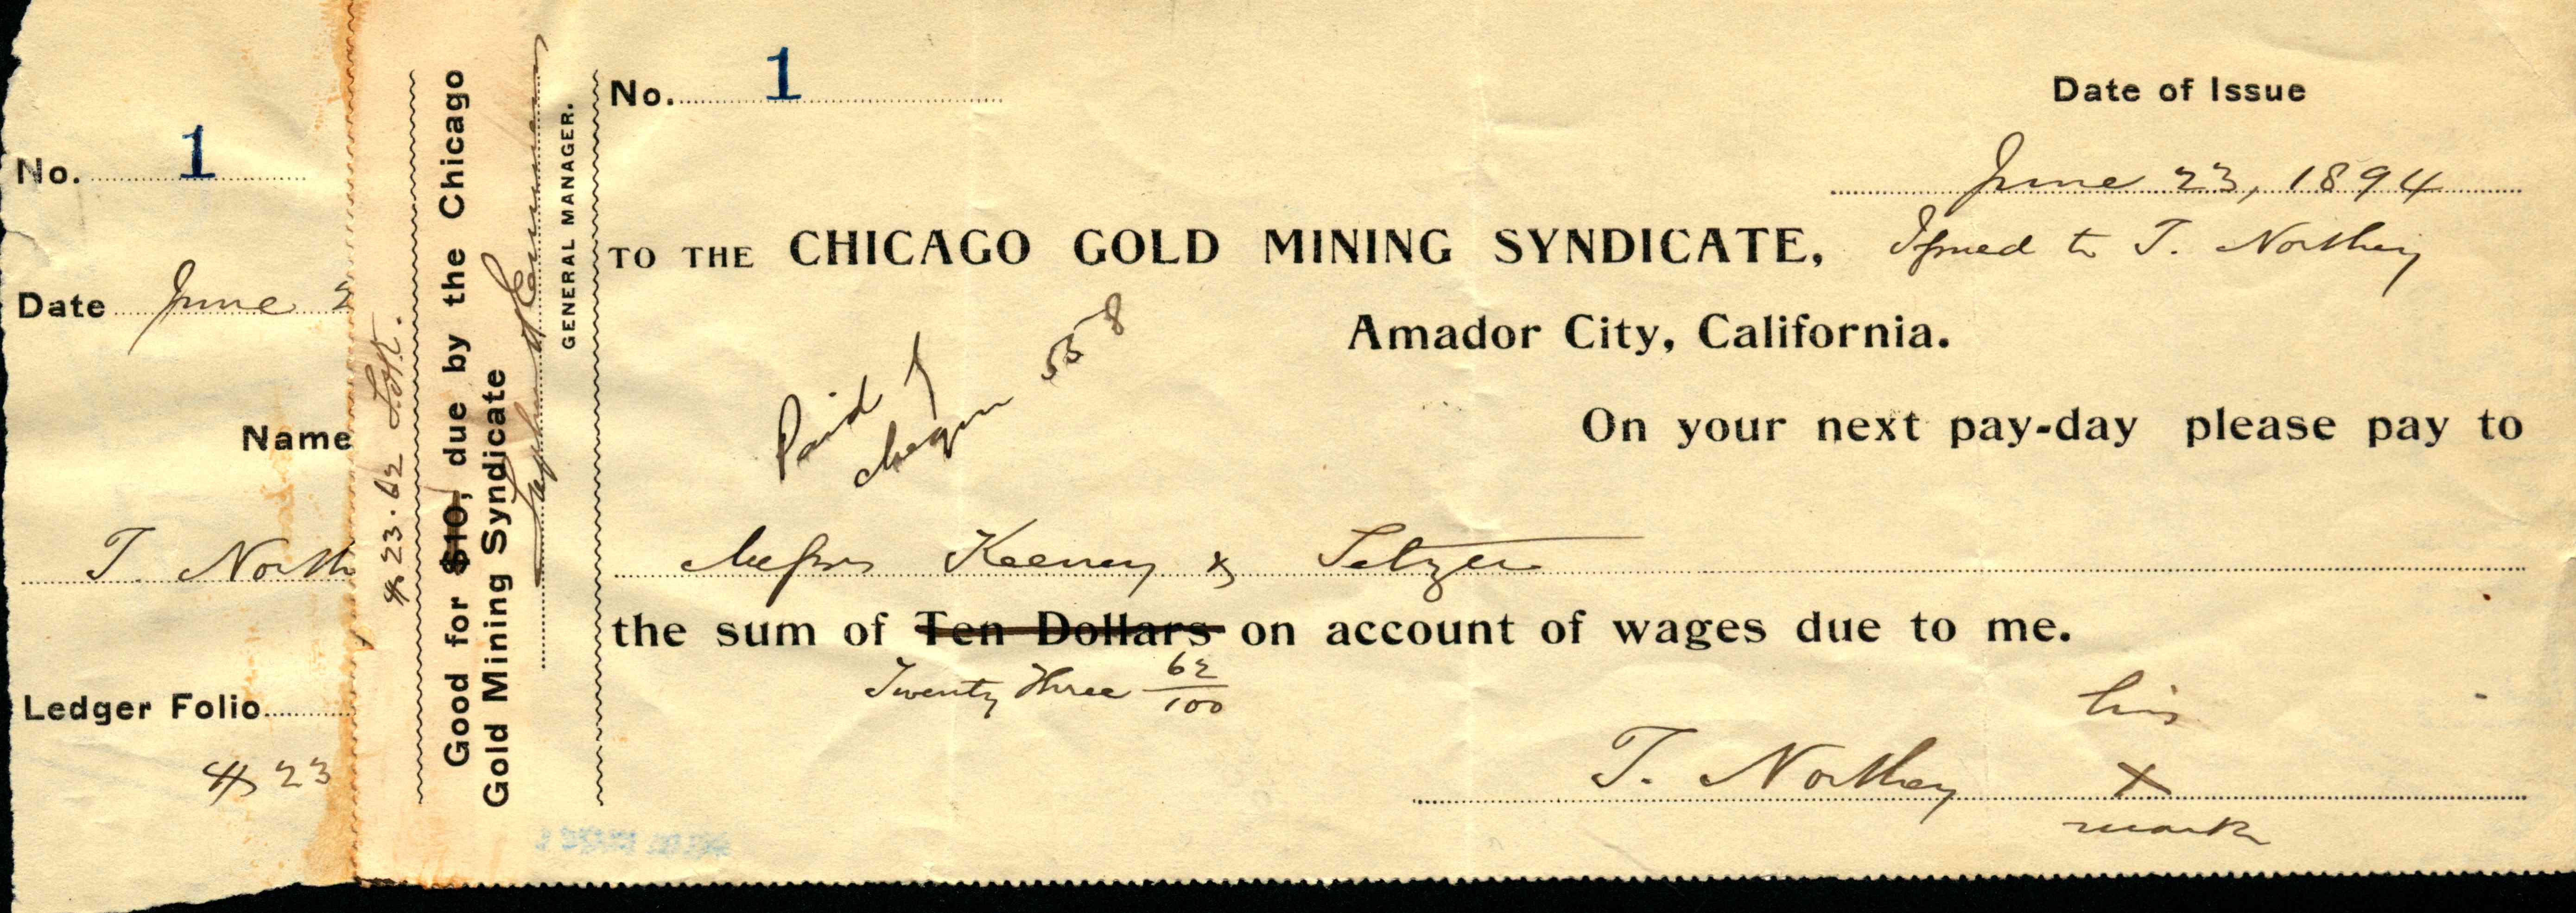 Shows a certificate of the Chicago Gold Mining Company with payment information below